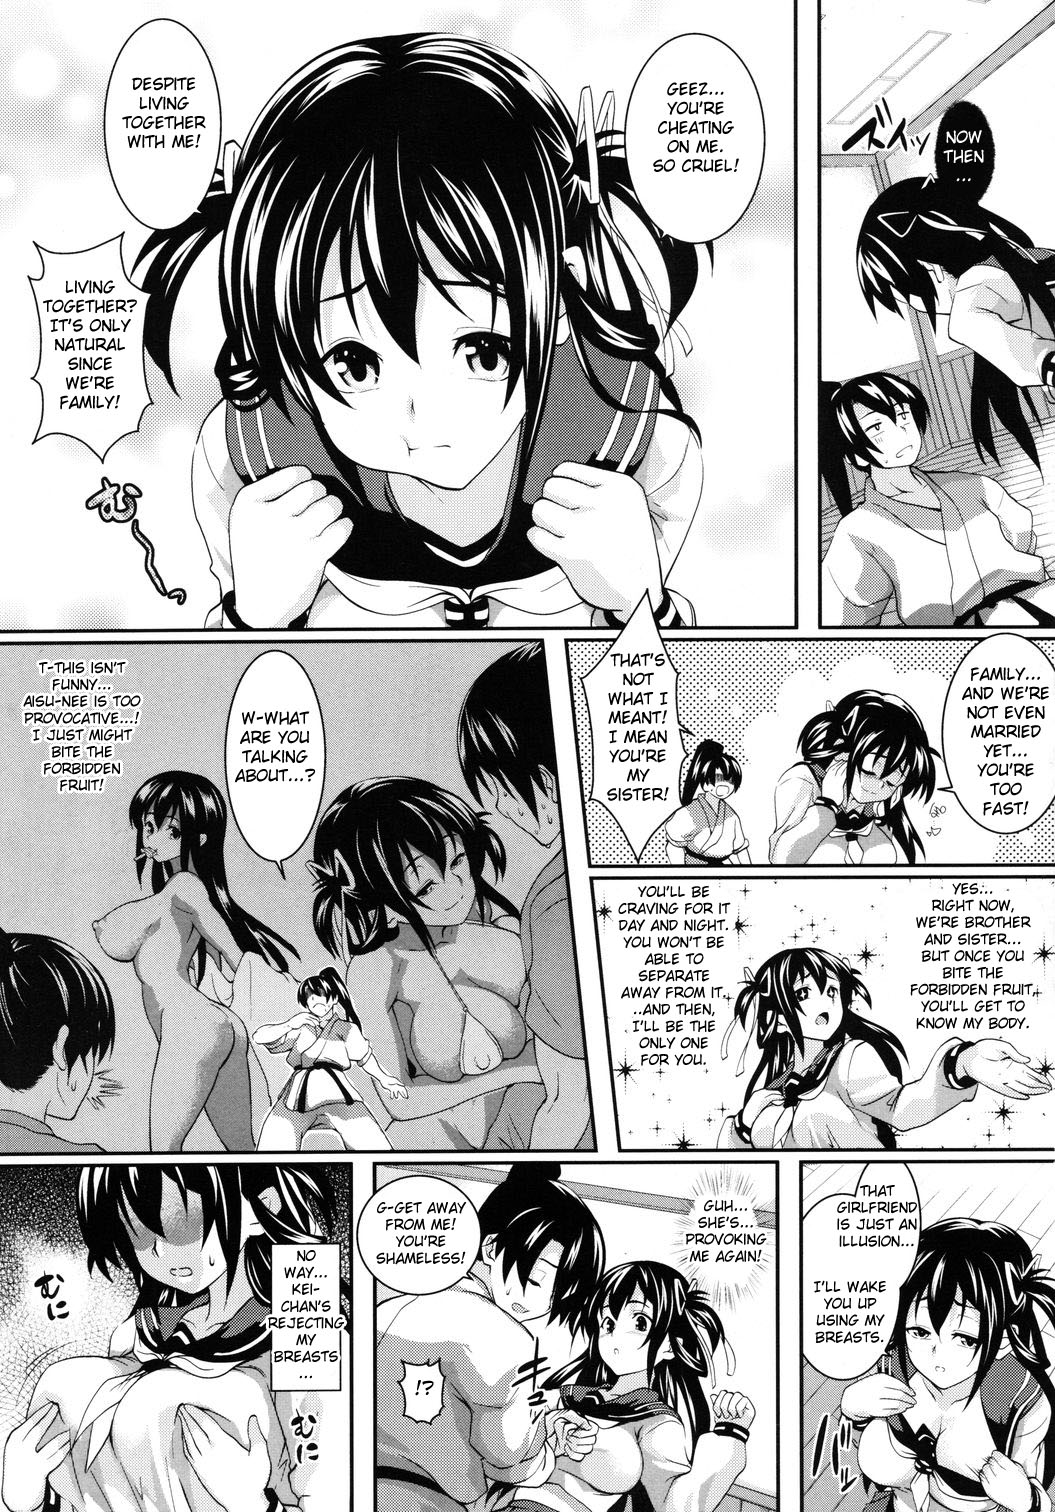 [soba] Tsukushite♪Amaete♪ | Hold Me, Fawn on Me Ch. 1-2 [English] {doujin-moe.us} page 7 full